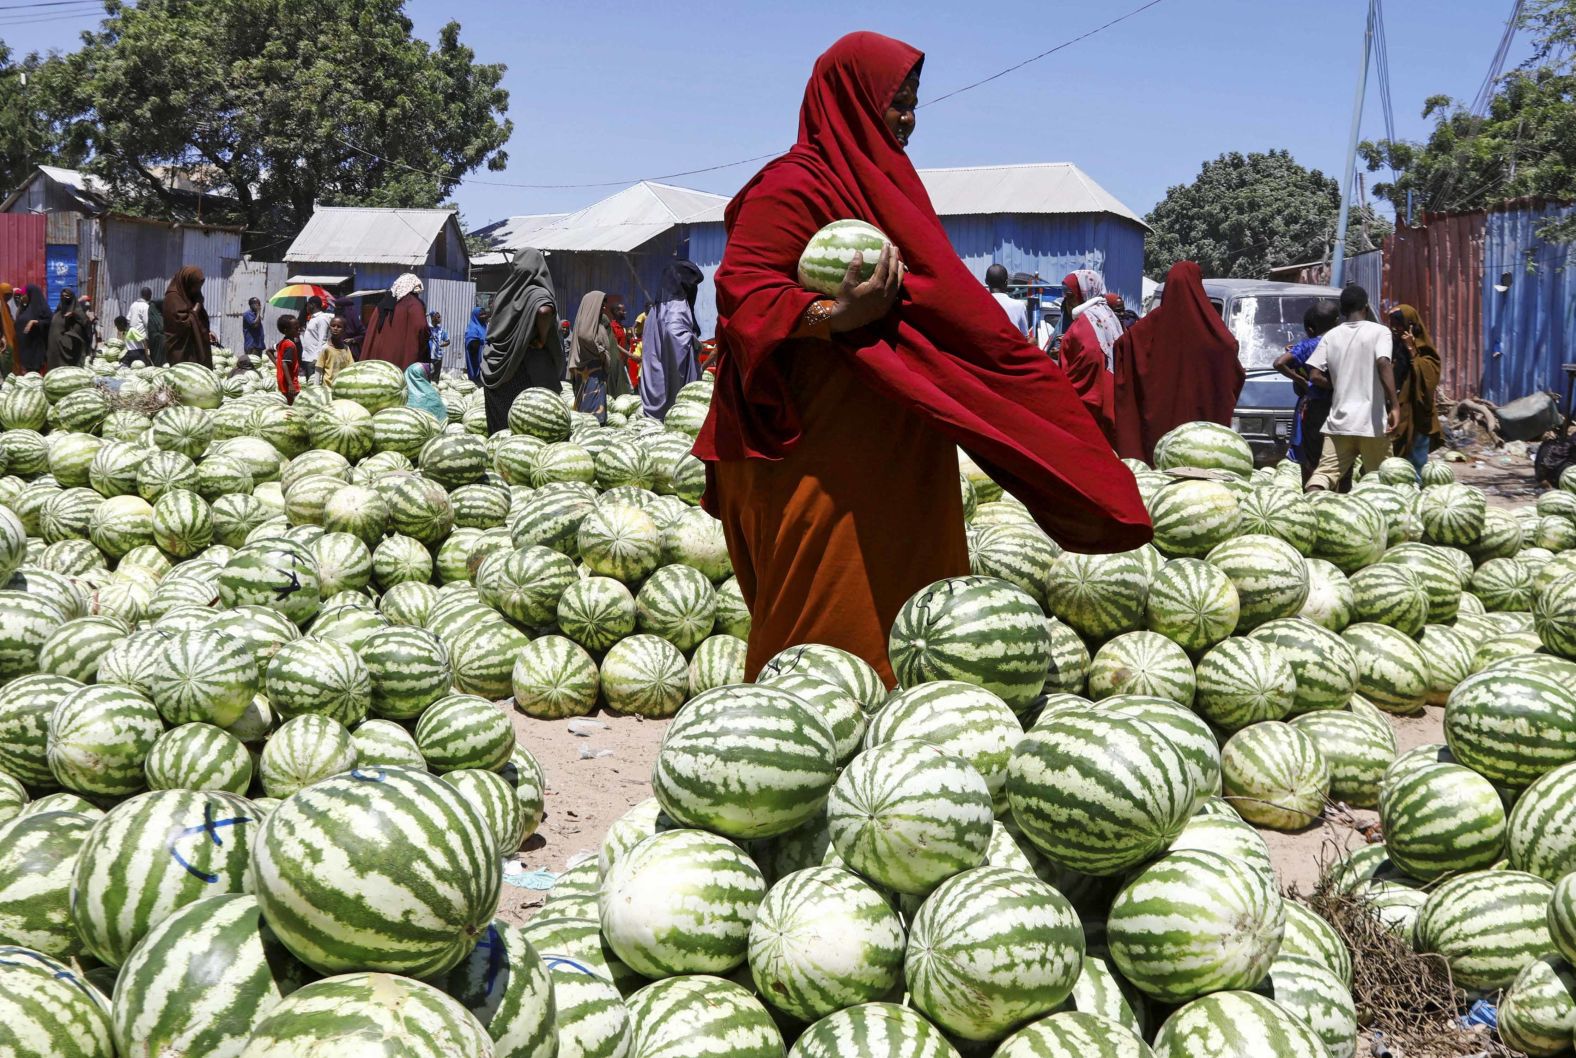 A Somali woman arranges watermelons for sale at an open-air market, as Muslims start the fasting month of Ramadan, in Mogadishu, Somalia.